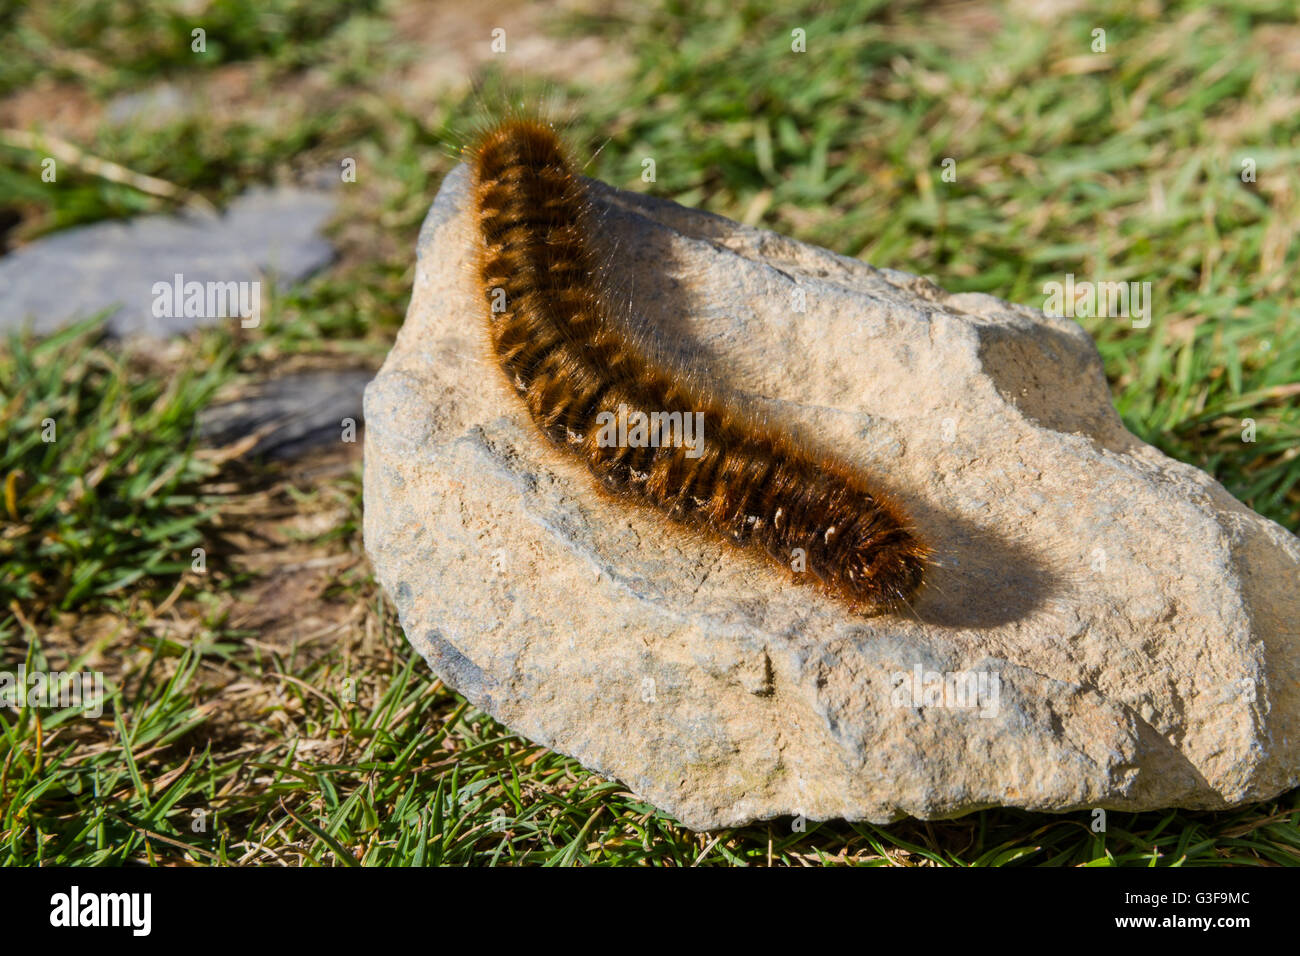 Hairy brown large caterpillar in the UK basking on a stone. Oag eggar or Lasiocampa quercus member of the Lasiocampidae family Stock Photo